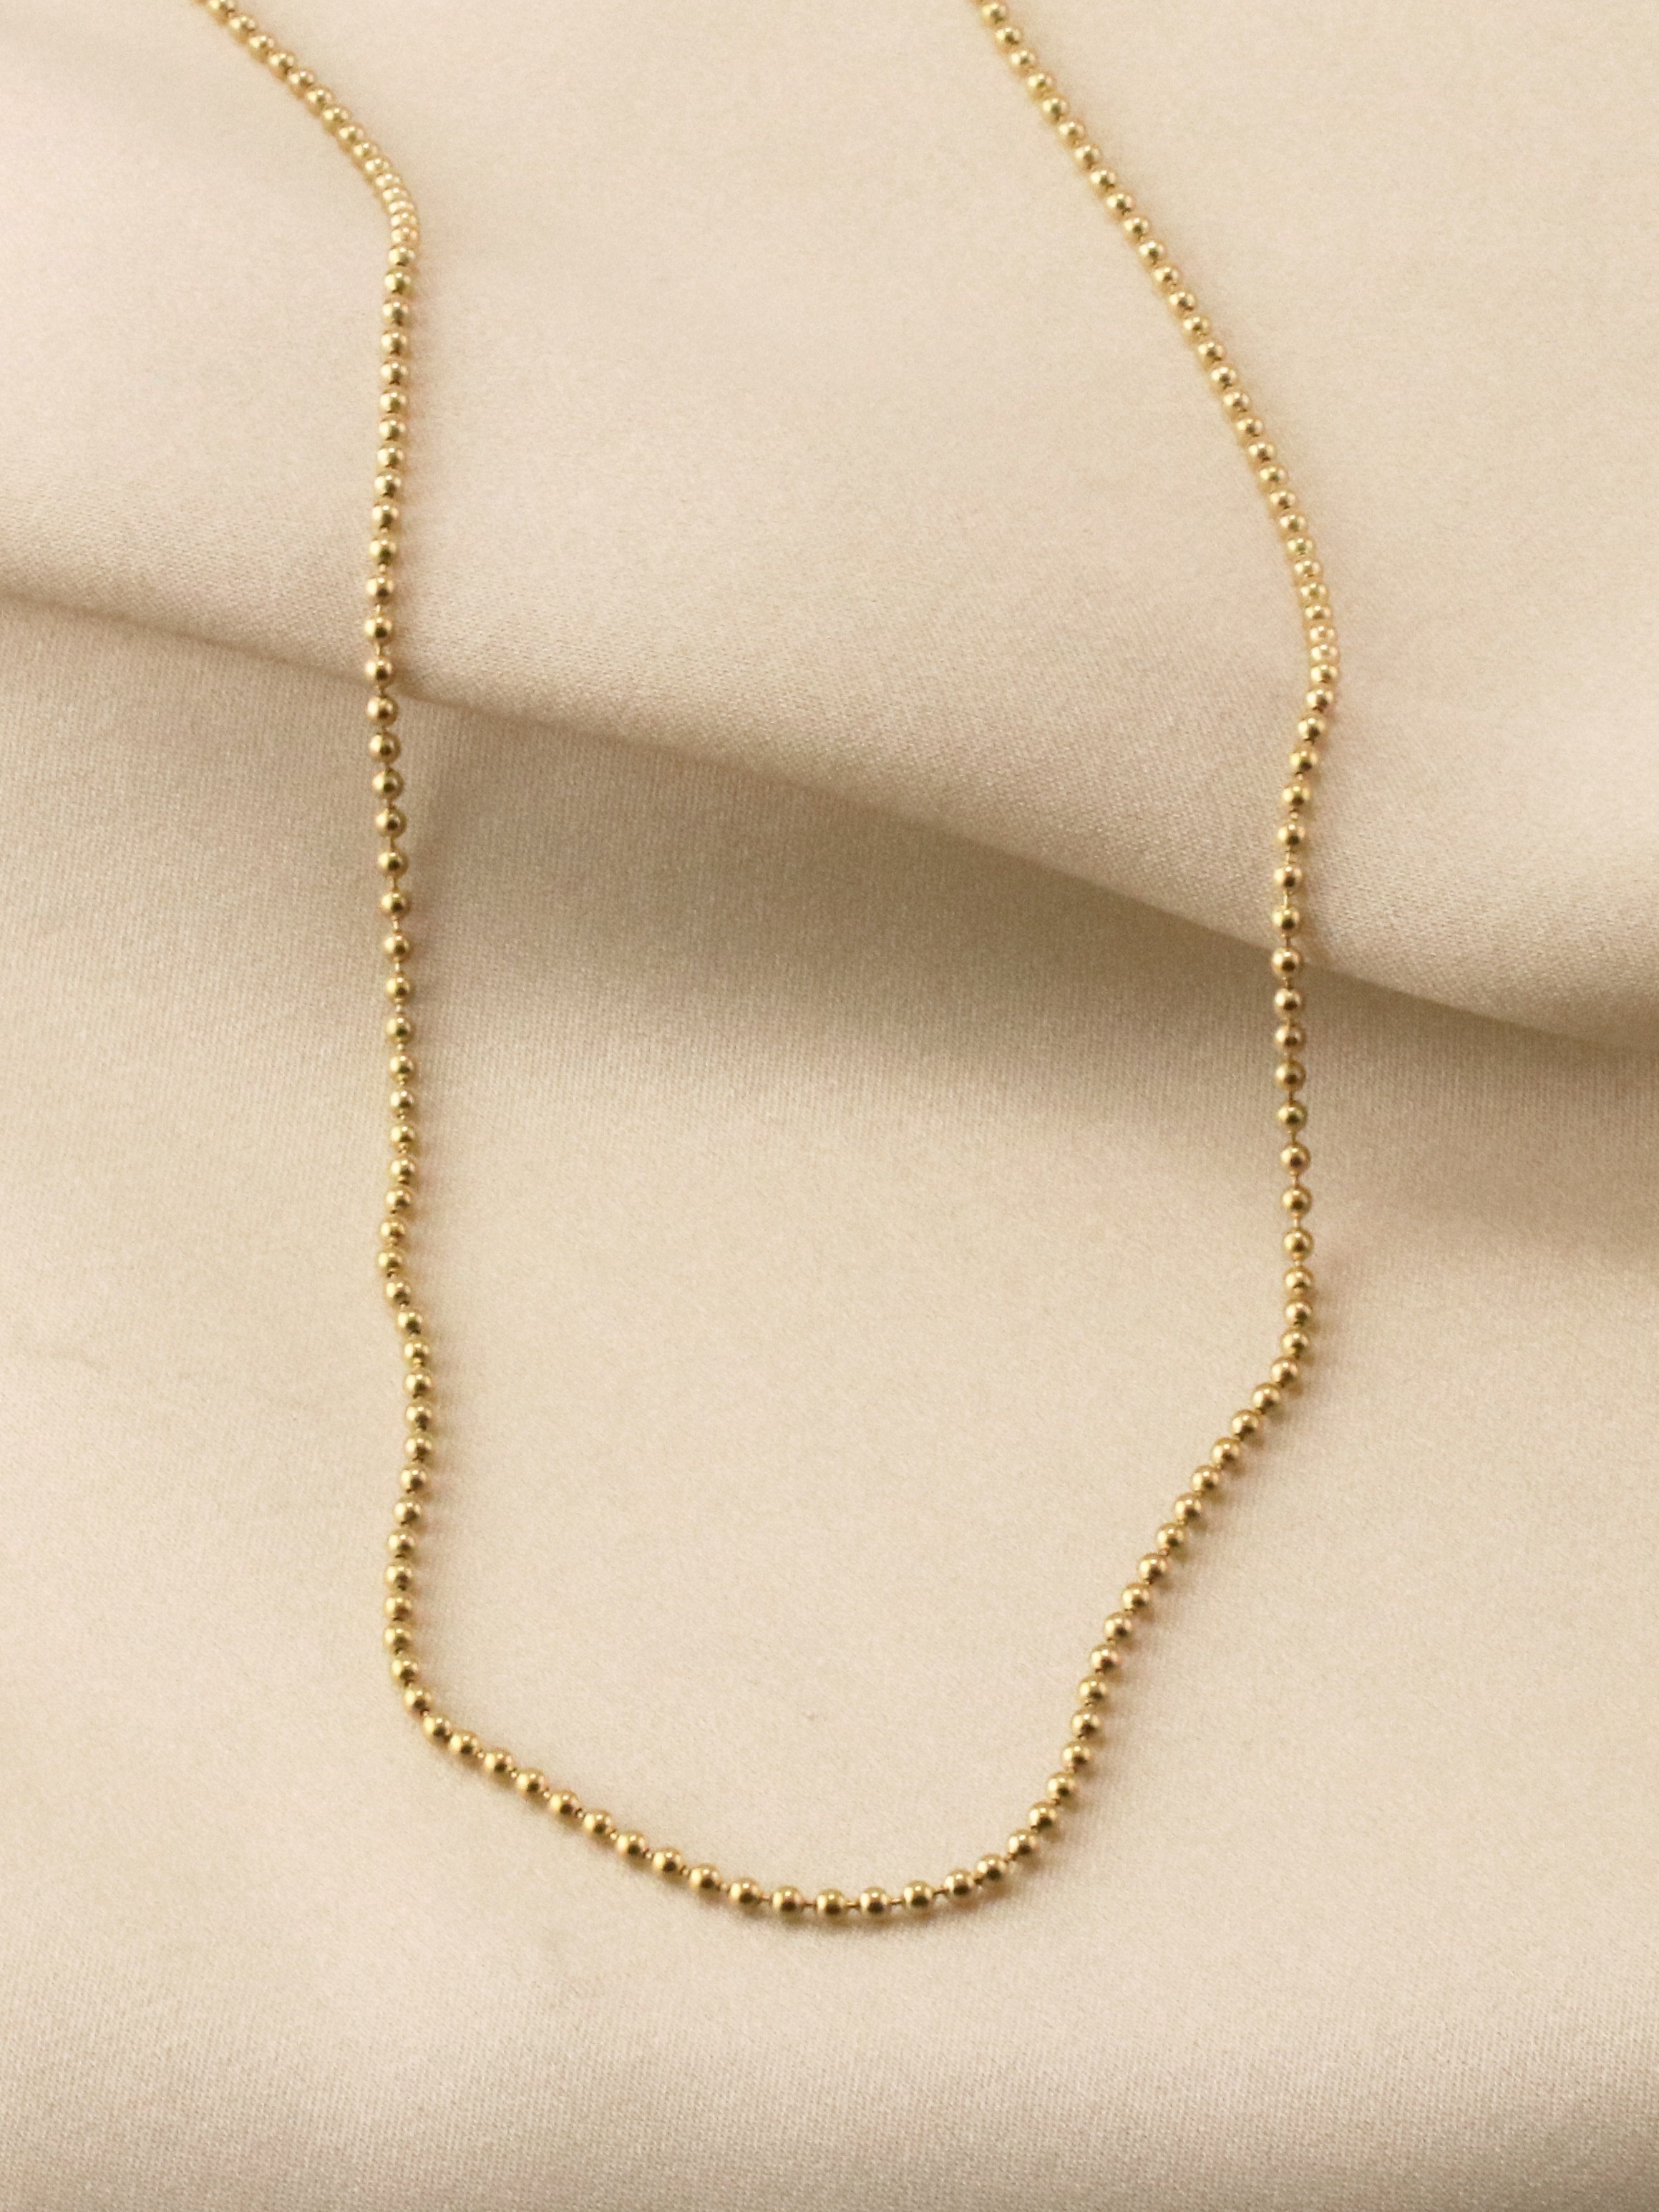 14KT Yellow Gold Beaded Women's necklace 16.5 Thin Delicate Small Balls Womens